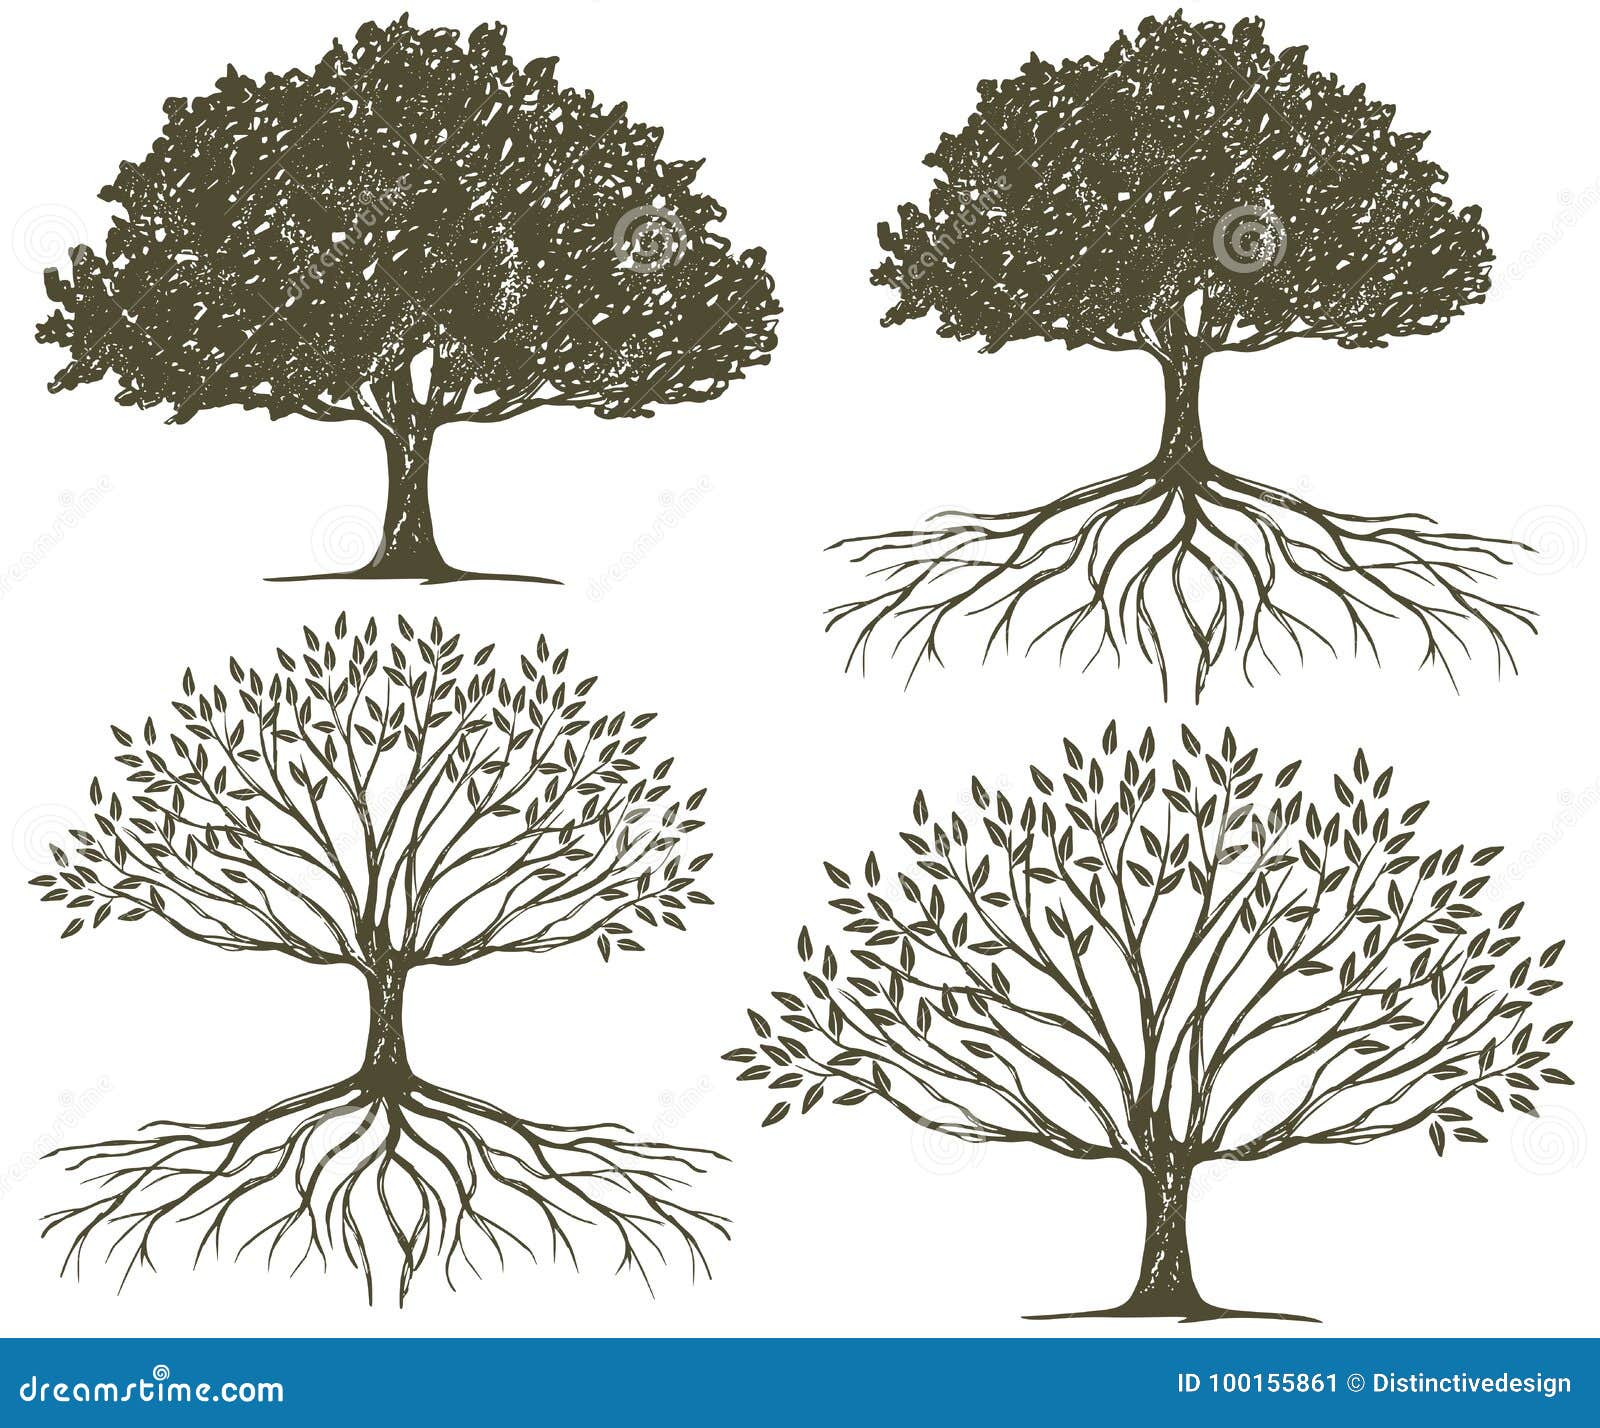 tree & tree roots silhouette collection